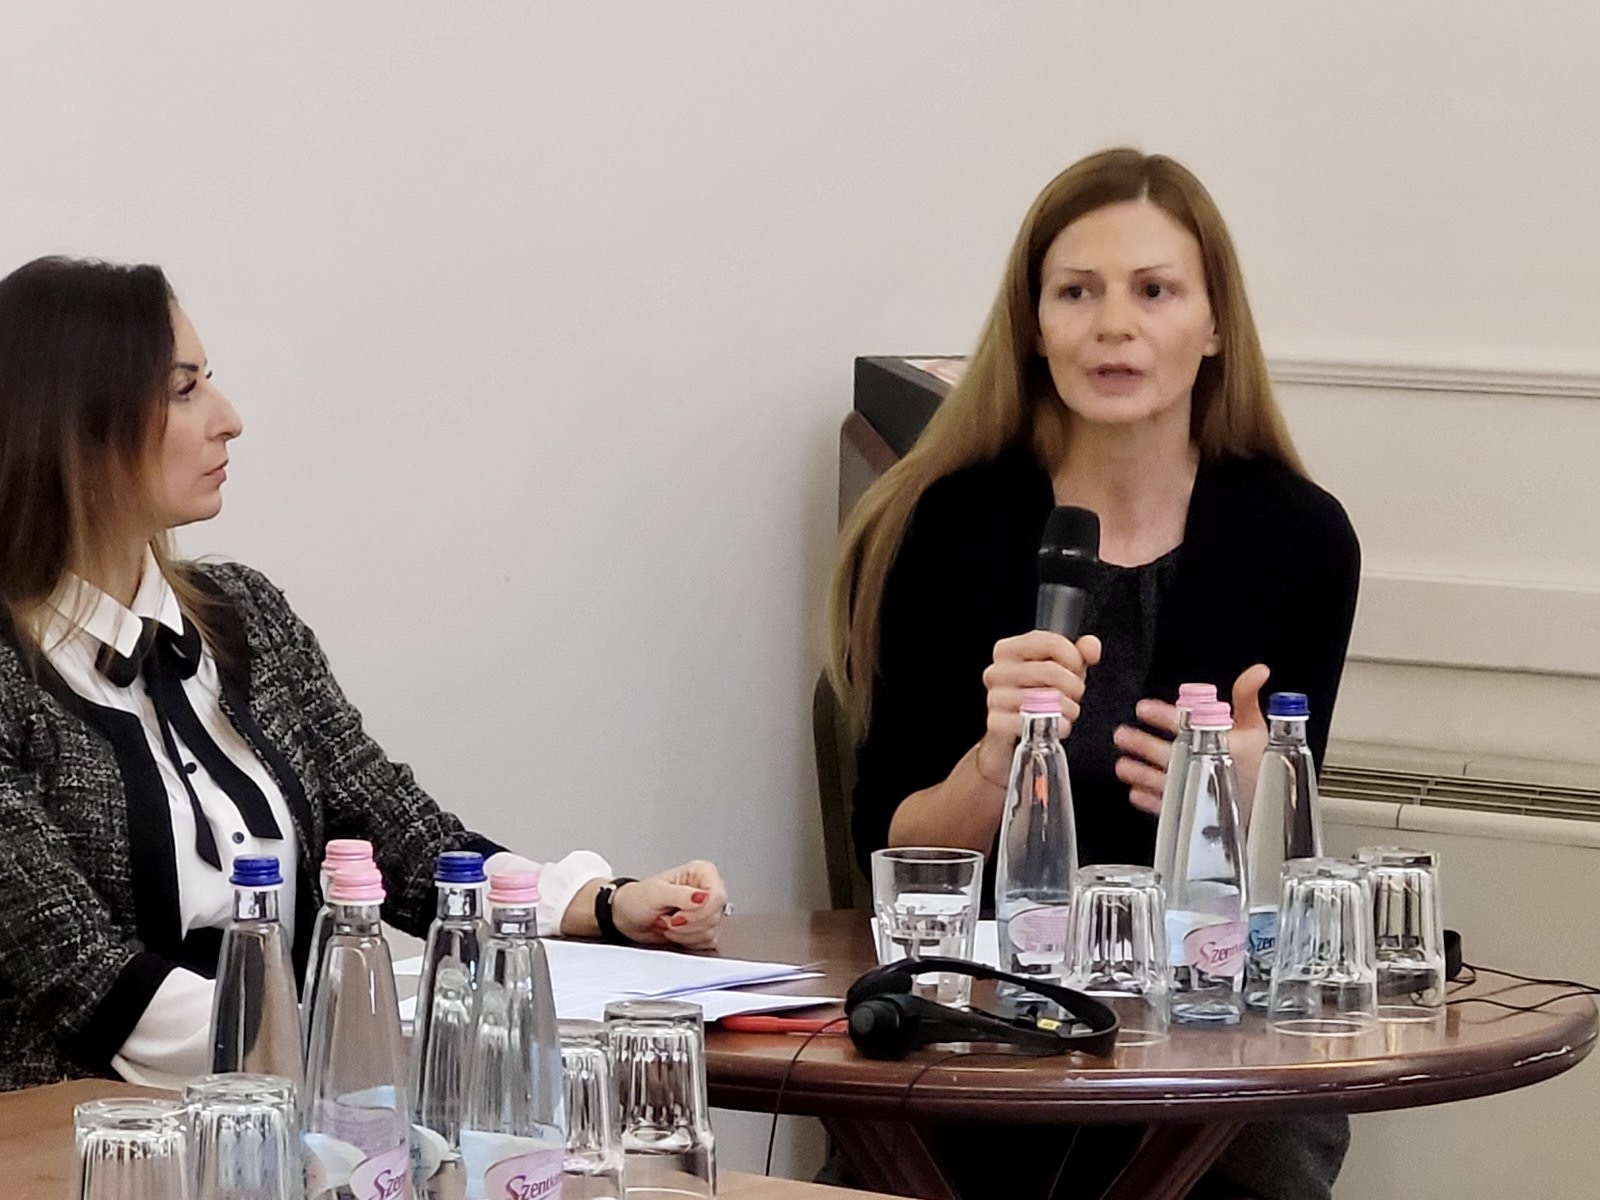 Svetlana Doncheva: Adult workers are becoming increasingly needed on the labor market